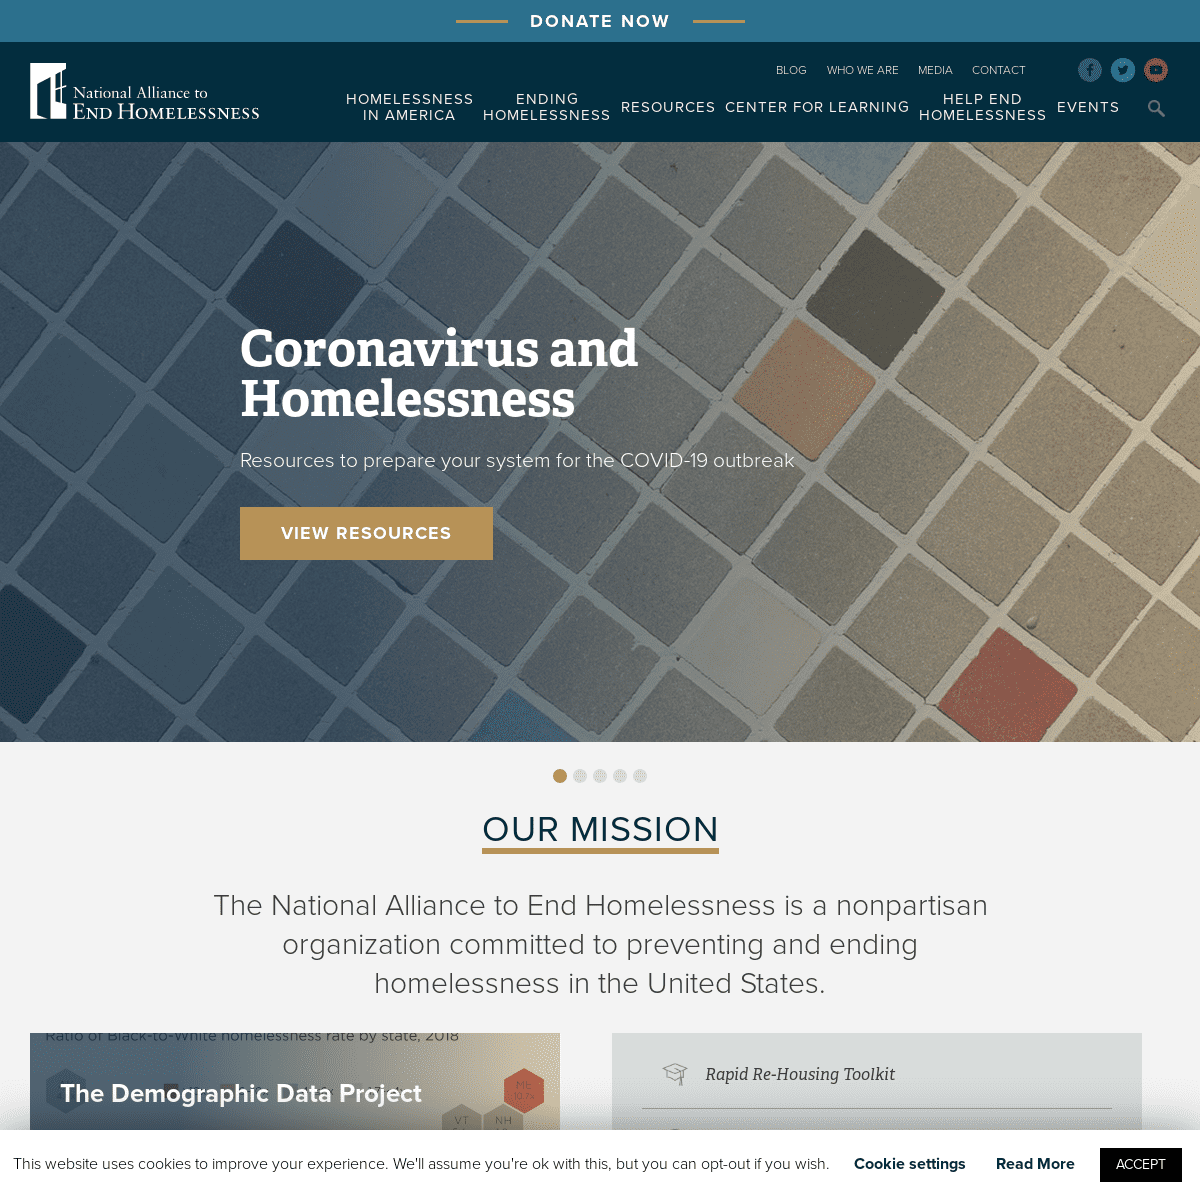 Home - National Alliance to End Homelessness